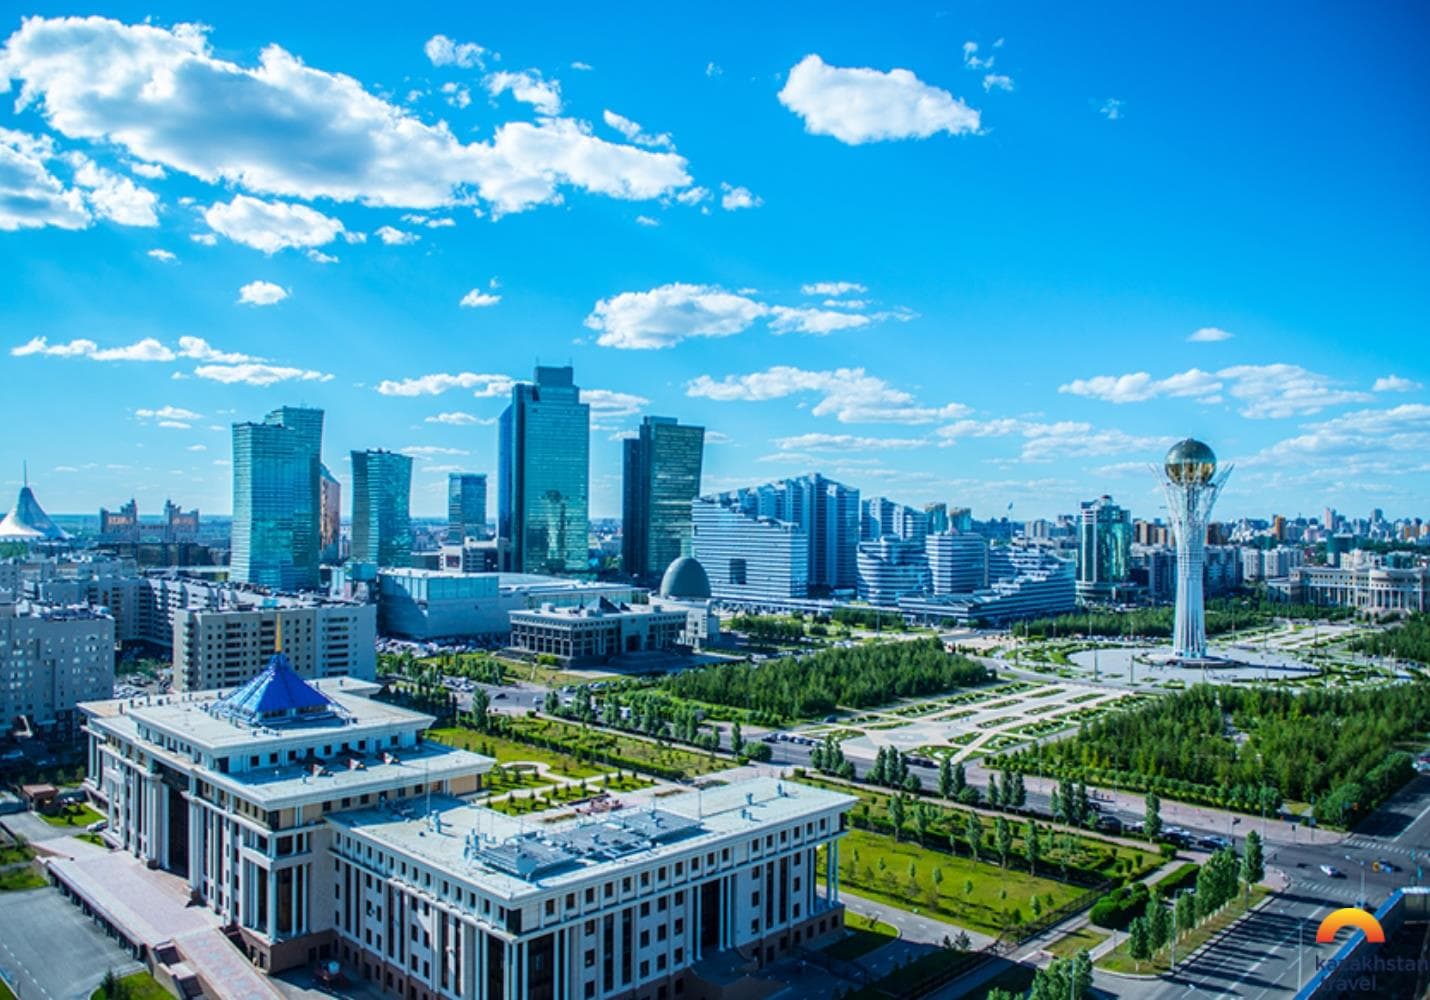 What to see in Astana in 24 hours